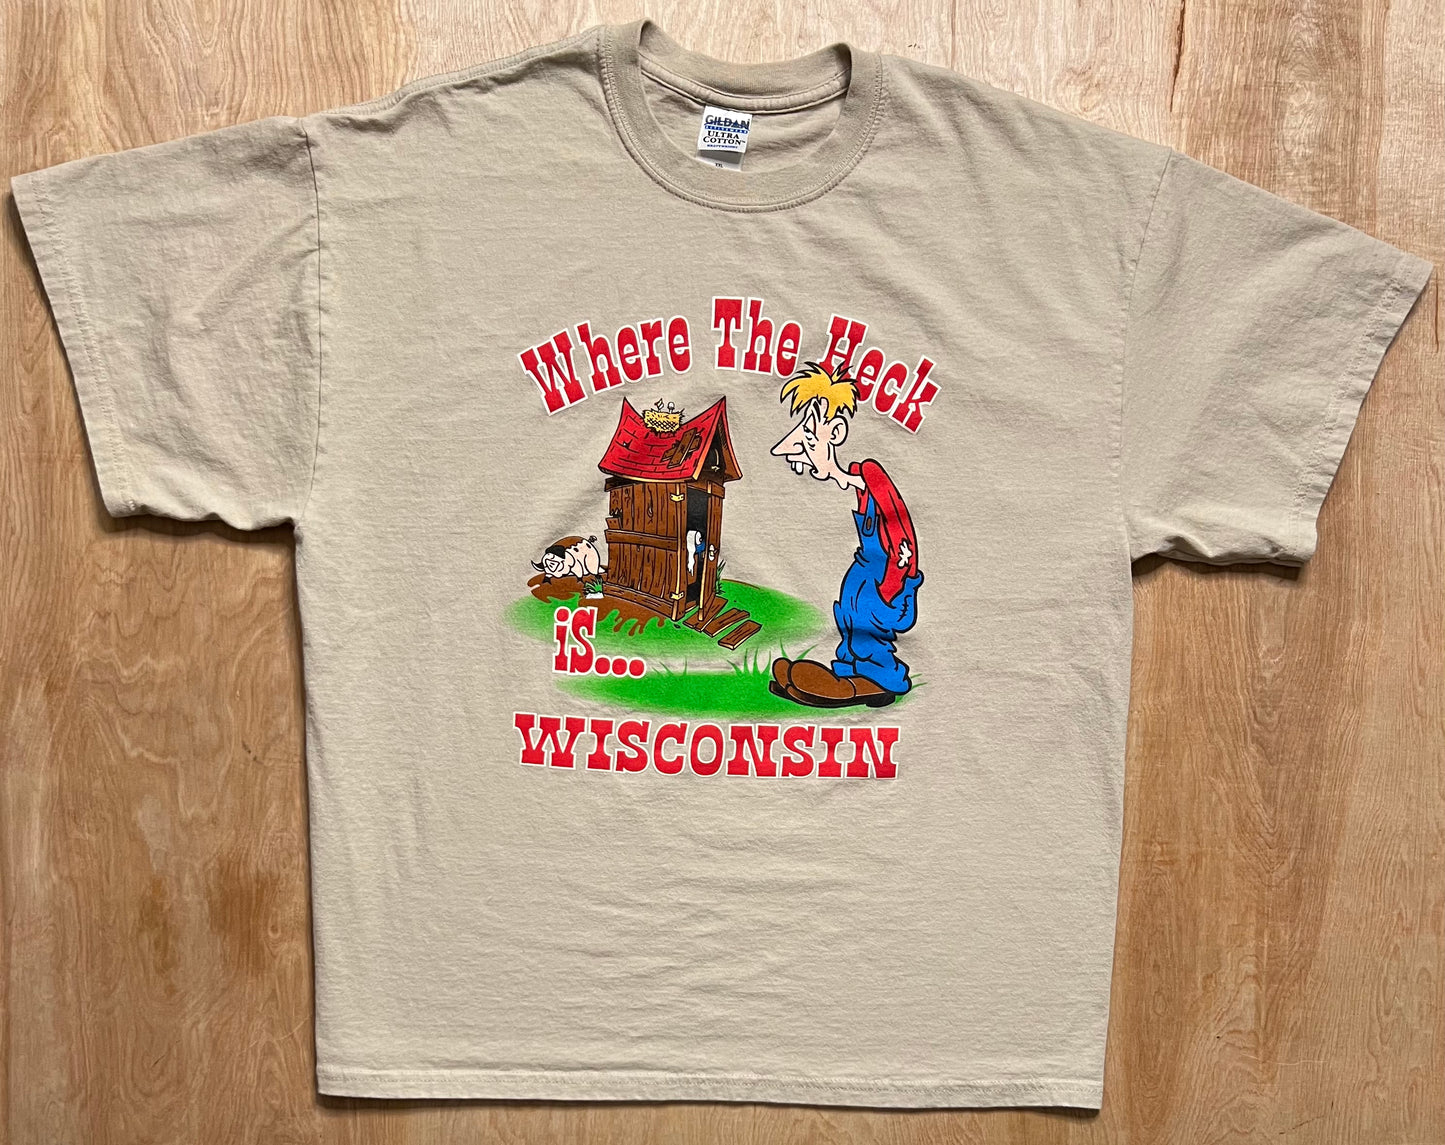 Vintage "Where the Heck is Wisconsin" T-Shirt